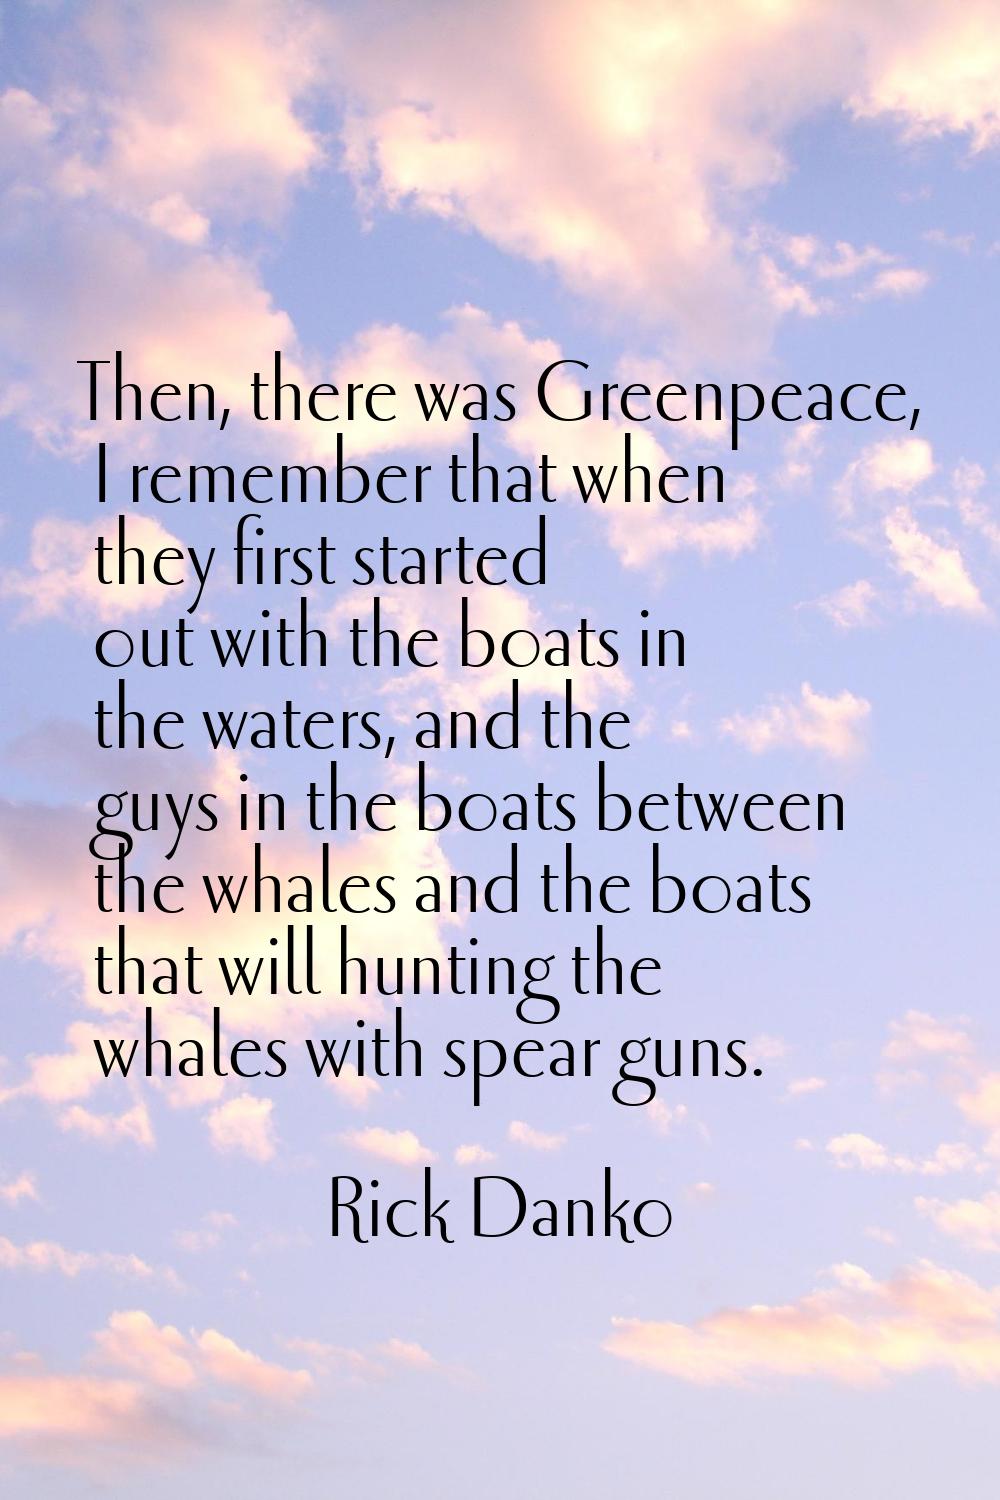 Then, there was Greenpeace, I remember that when they first started out with the boats in the water